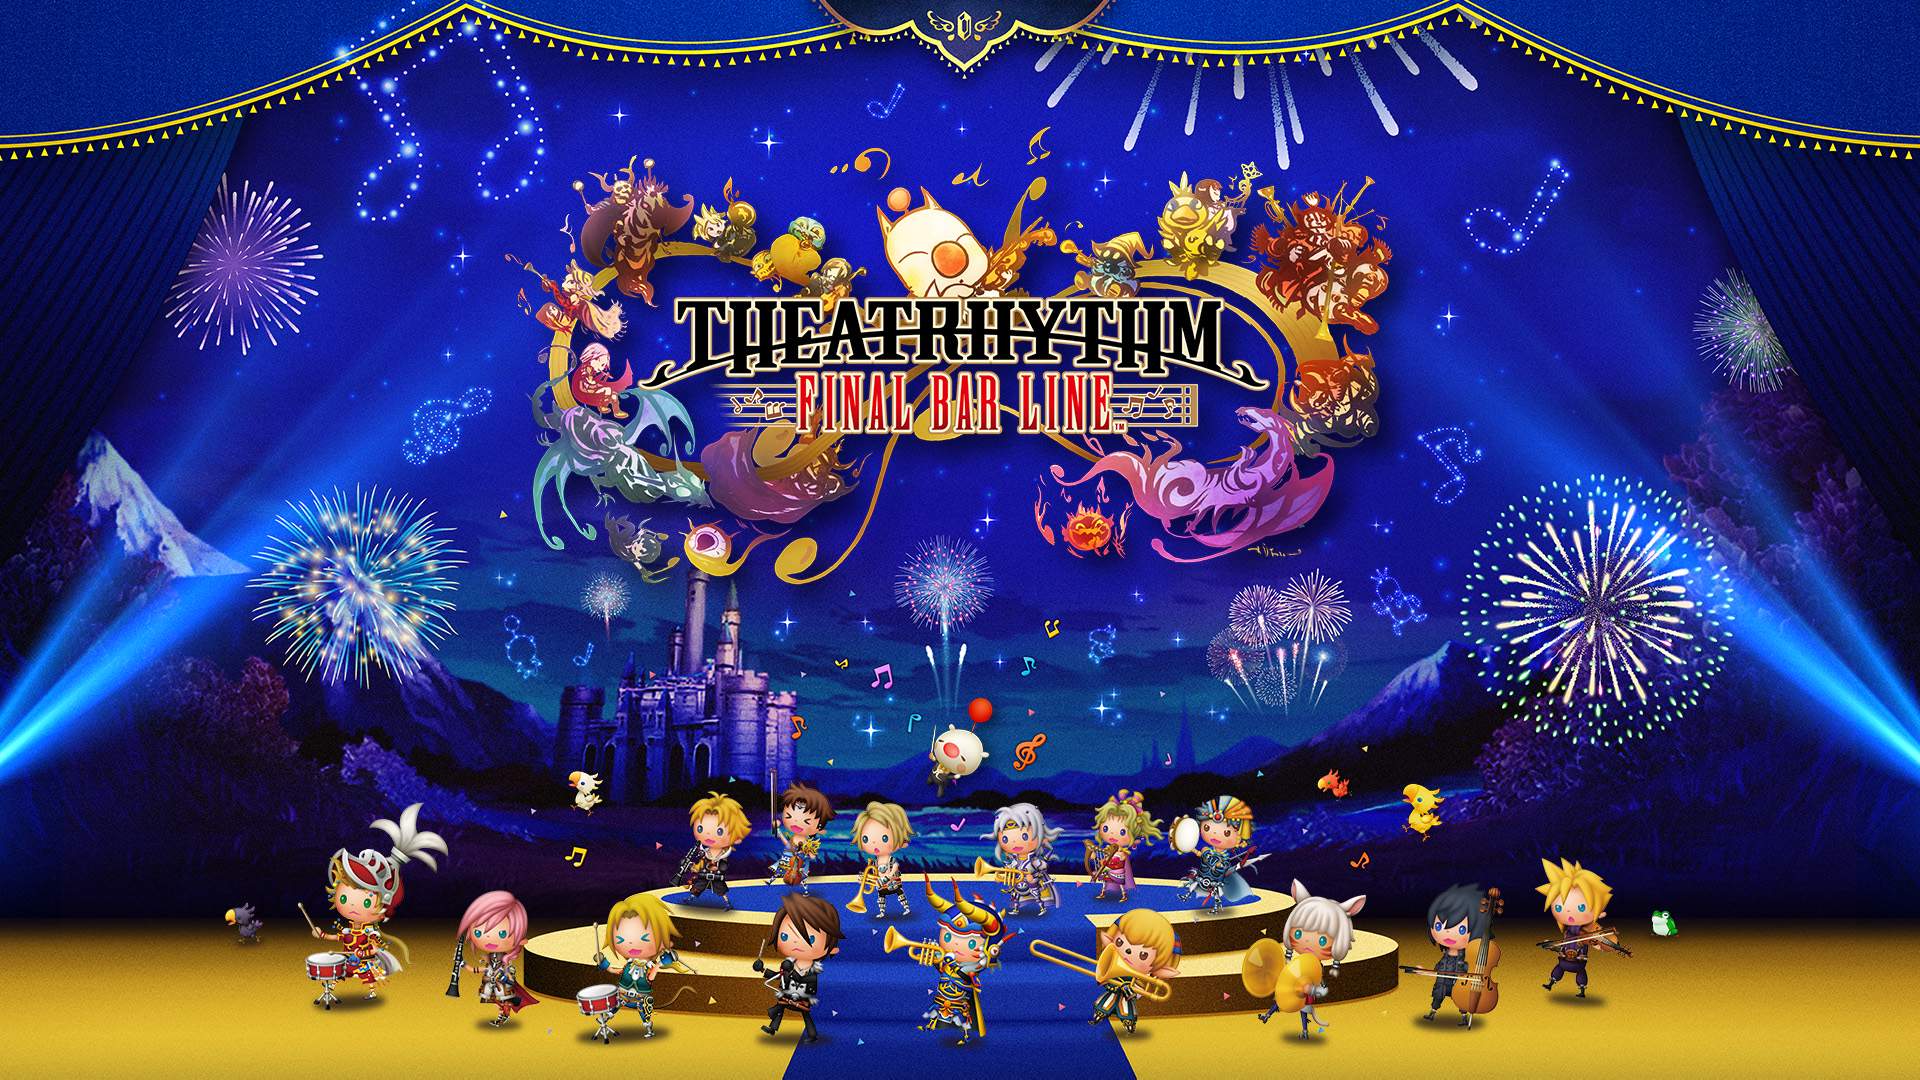 Game logo on festive blue background and cute versions of FINAL FANTASY characters